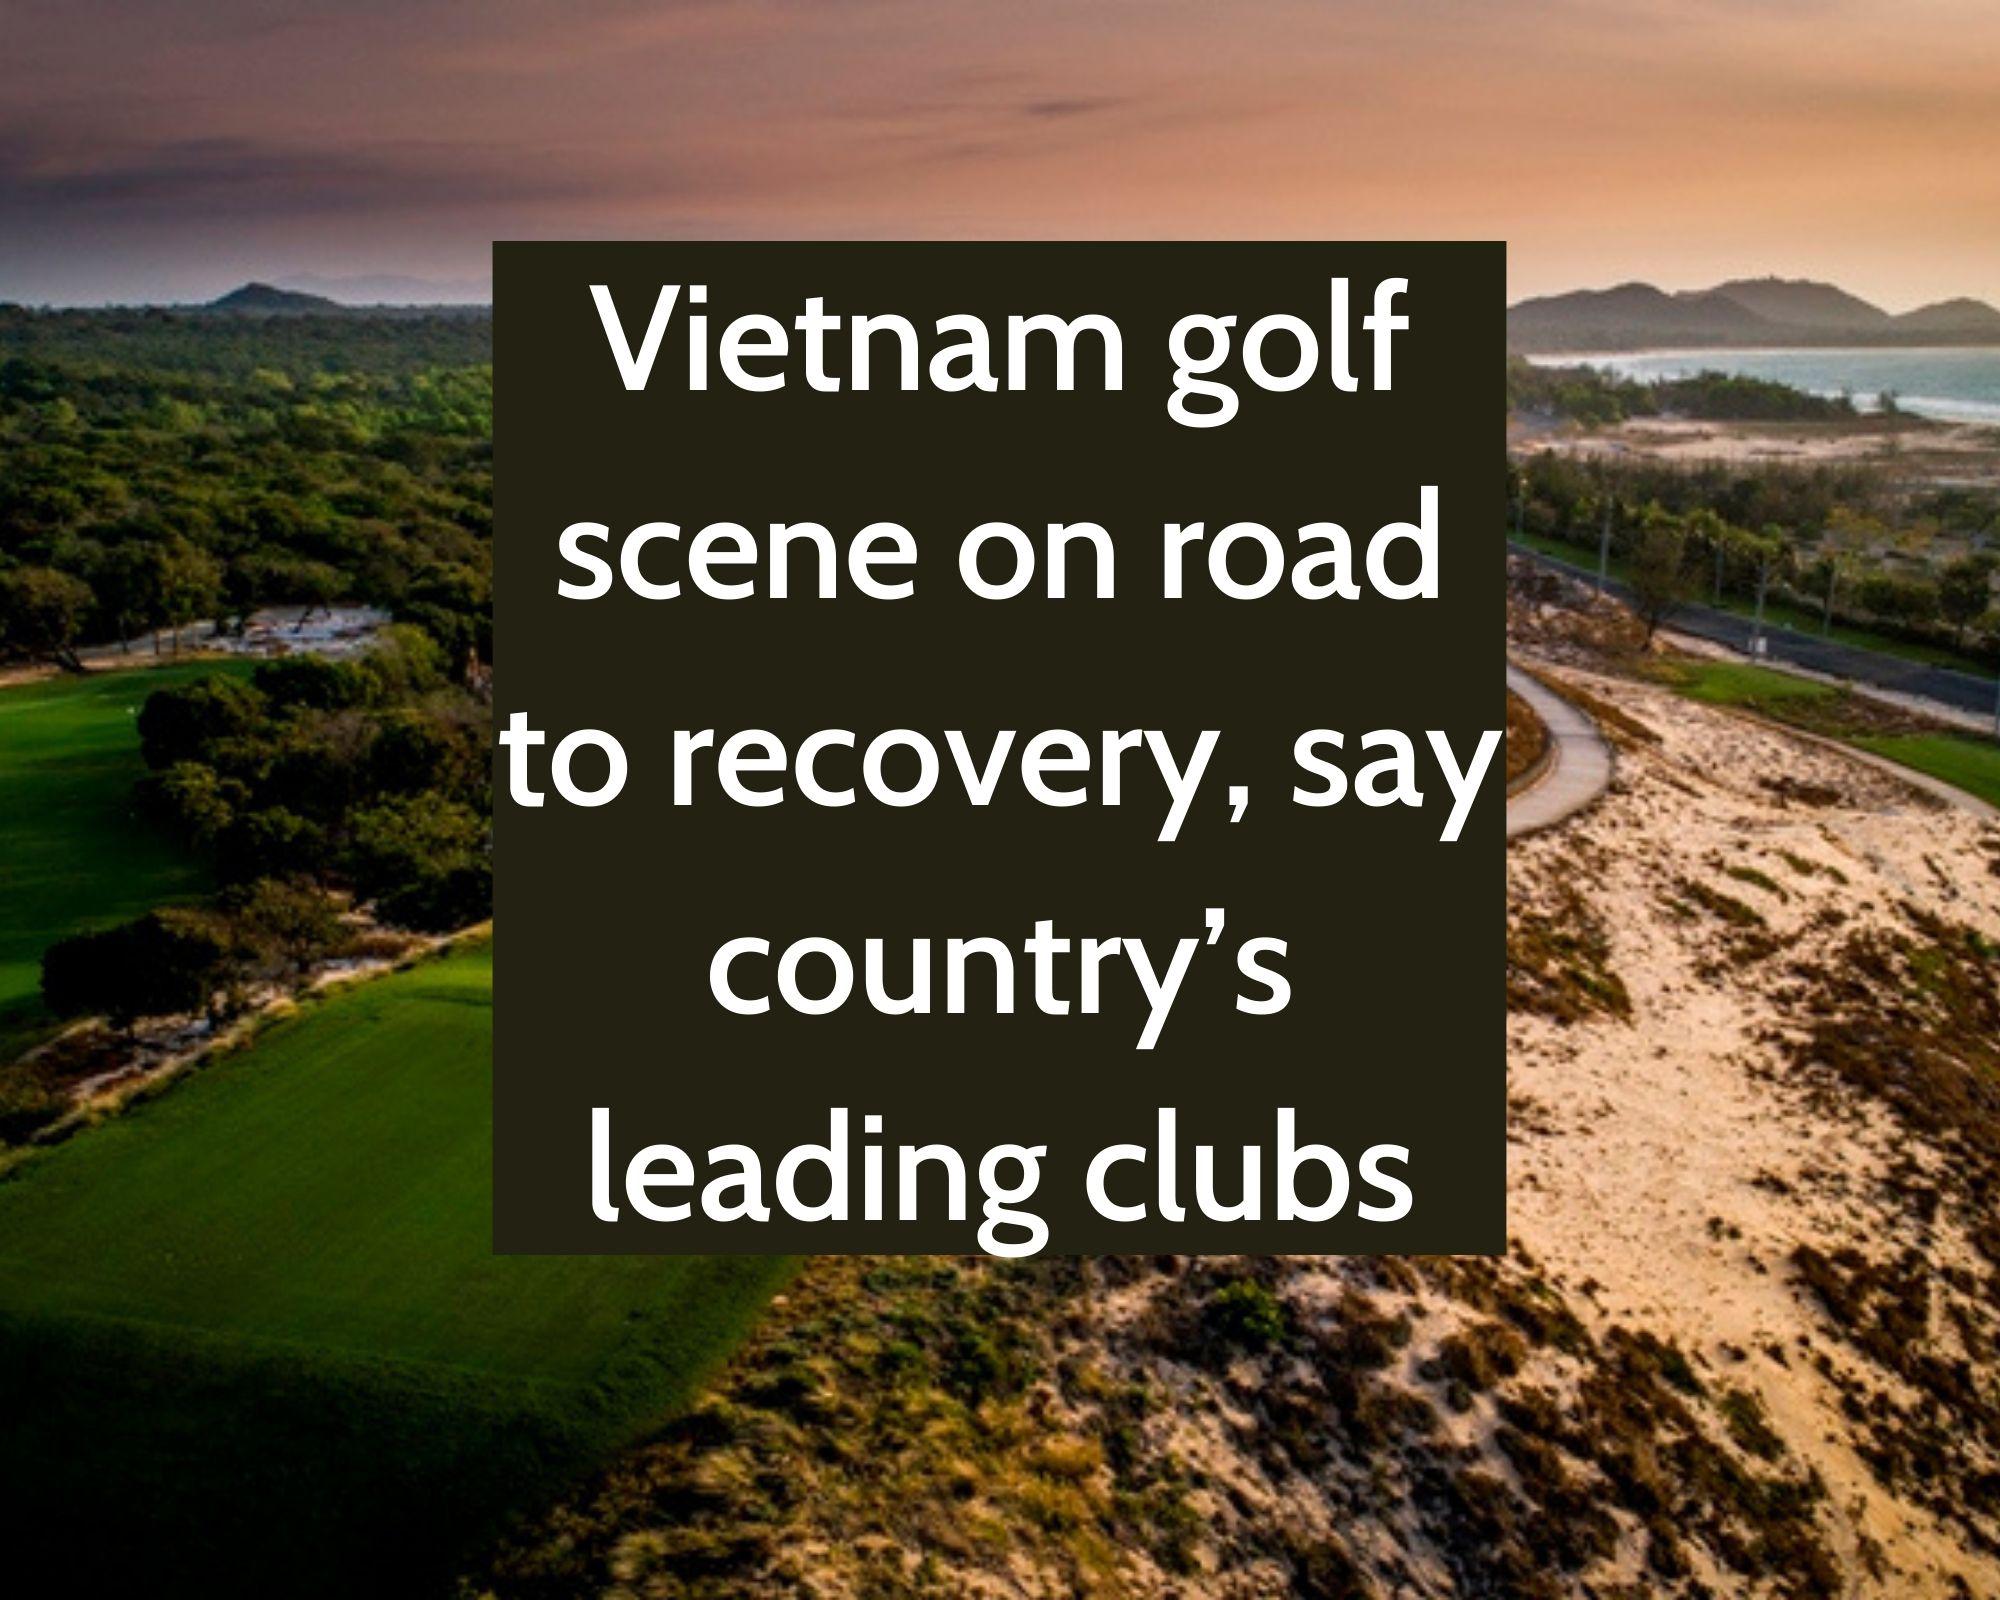 Vietnam golf scene on road to recovery, say country’s leading clubs